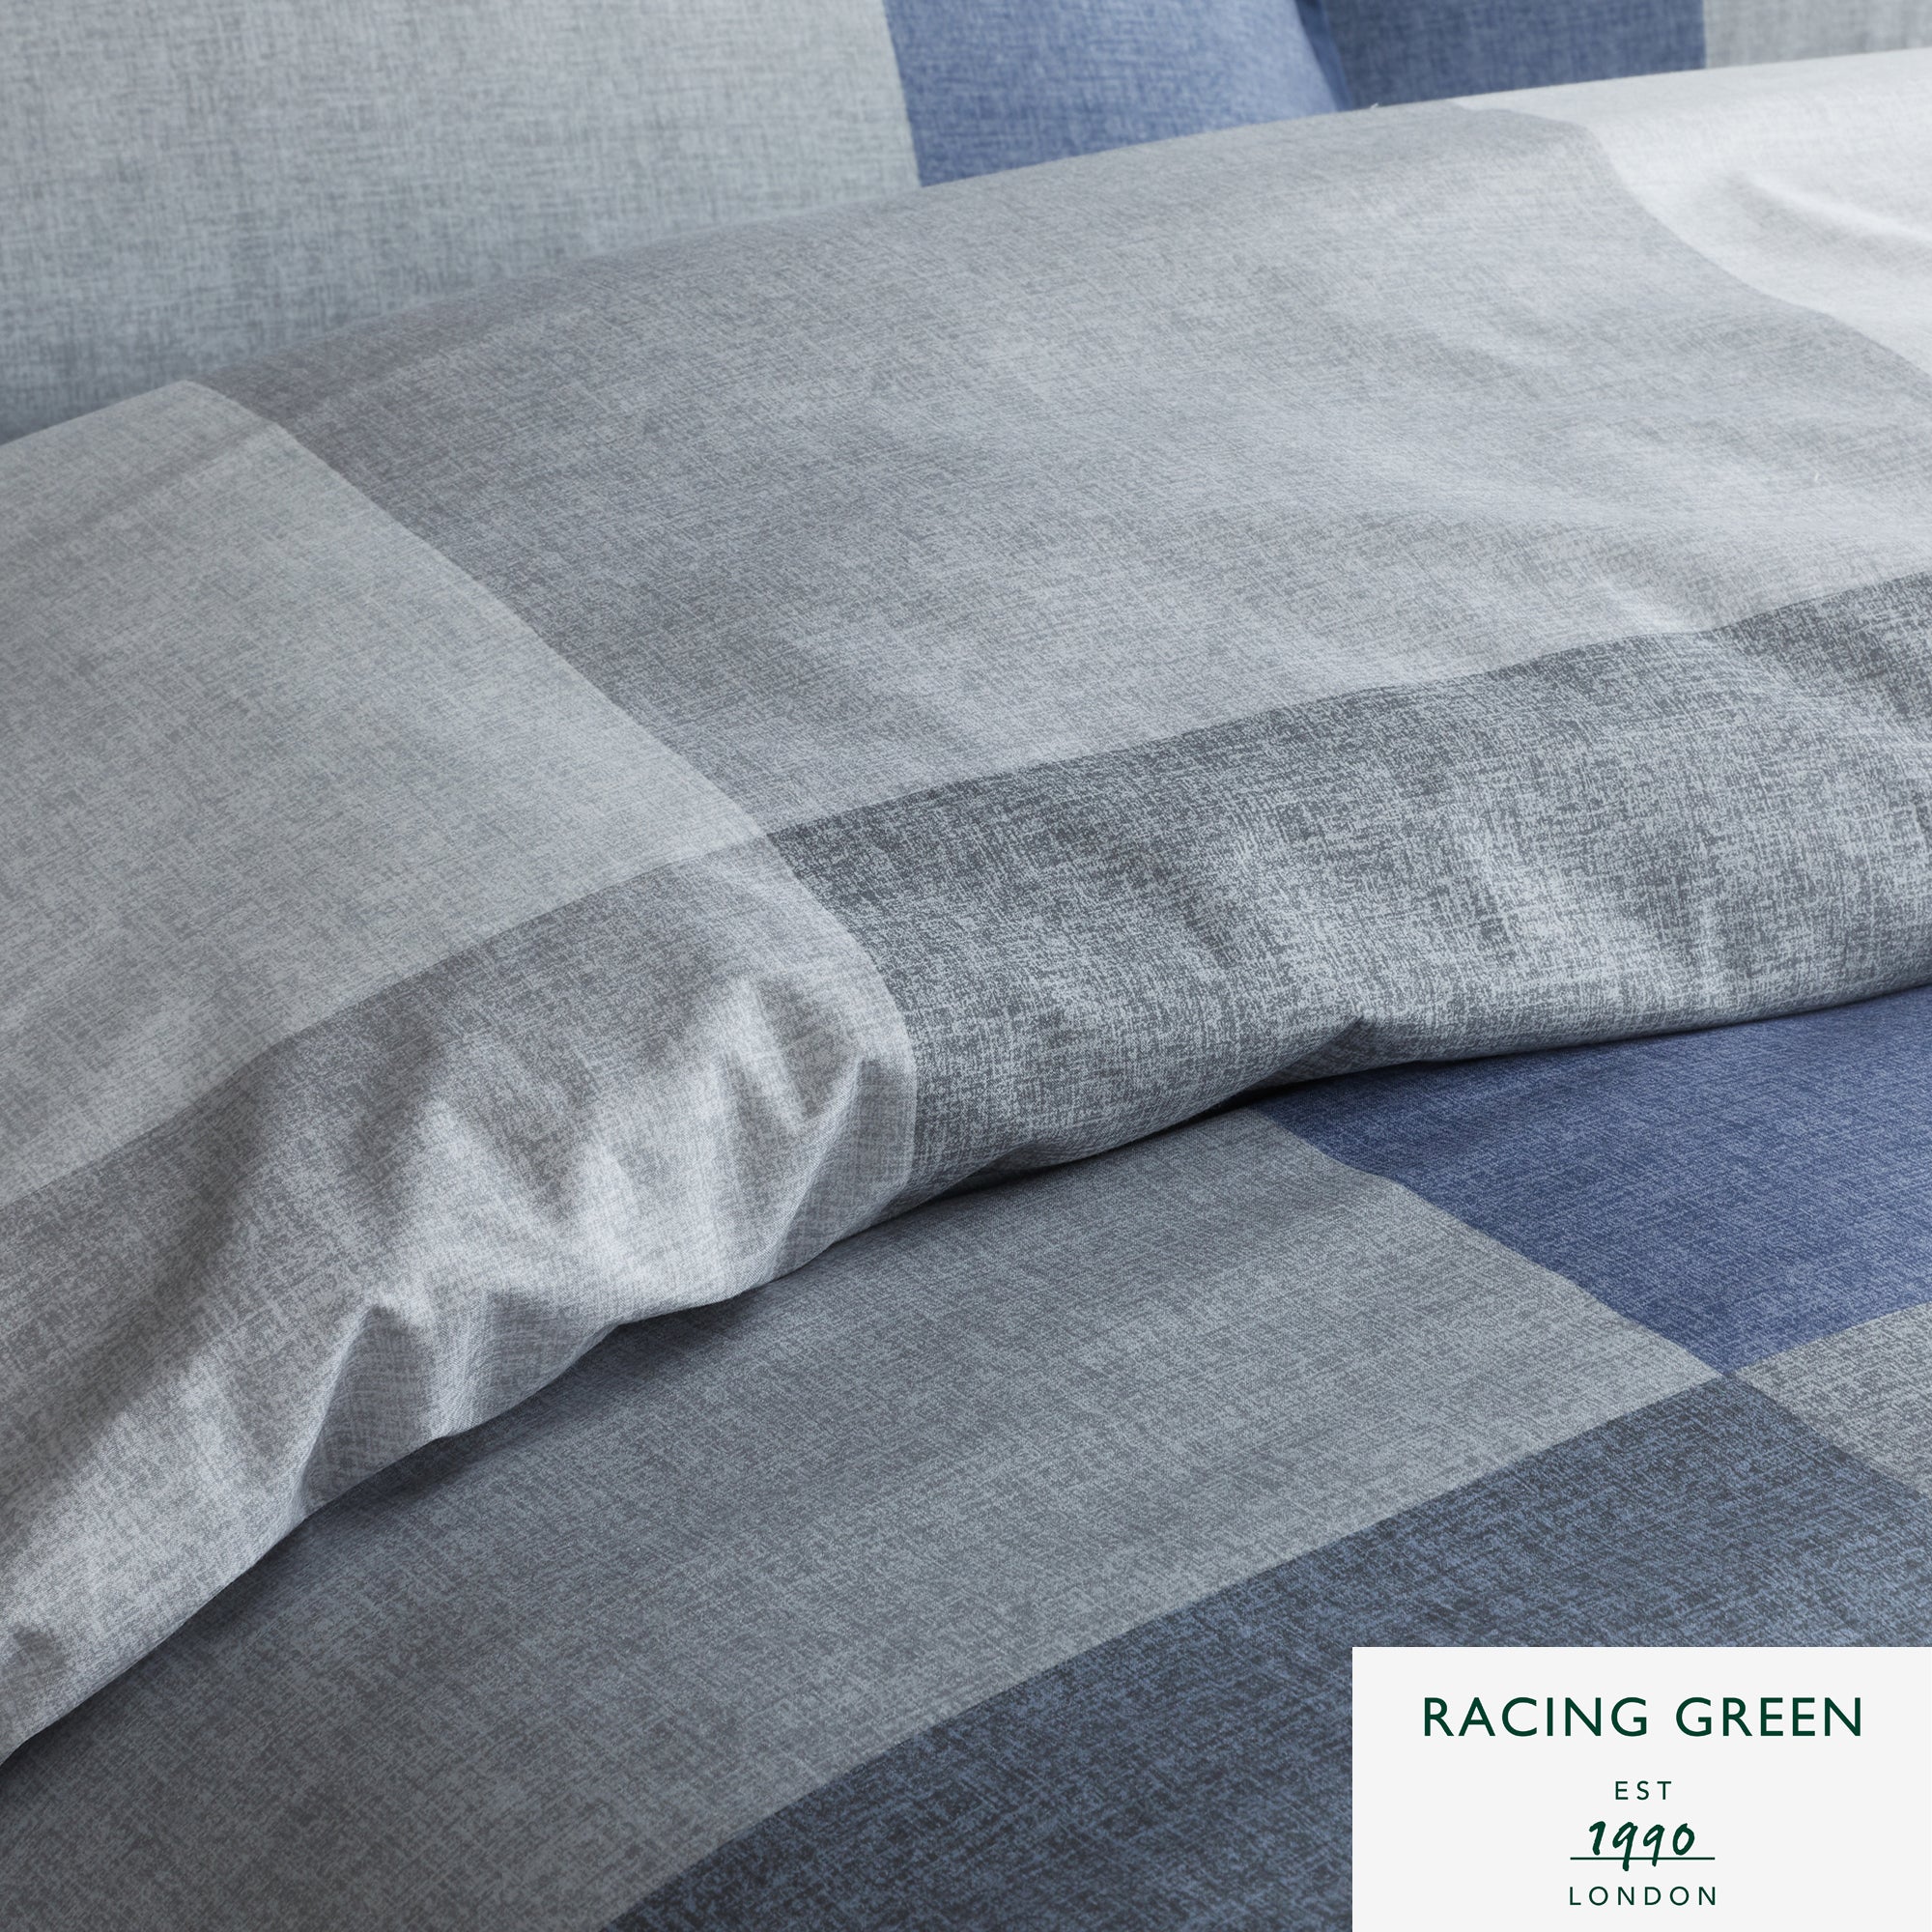 Travis - Easy Care 180 TC Duvet Set in Blue - by Racing Green